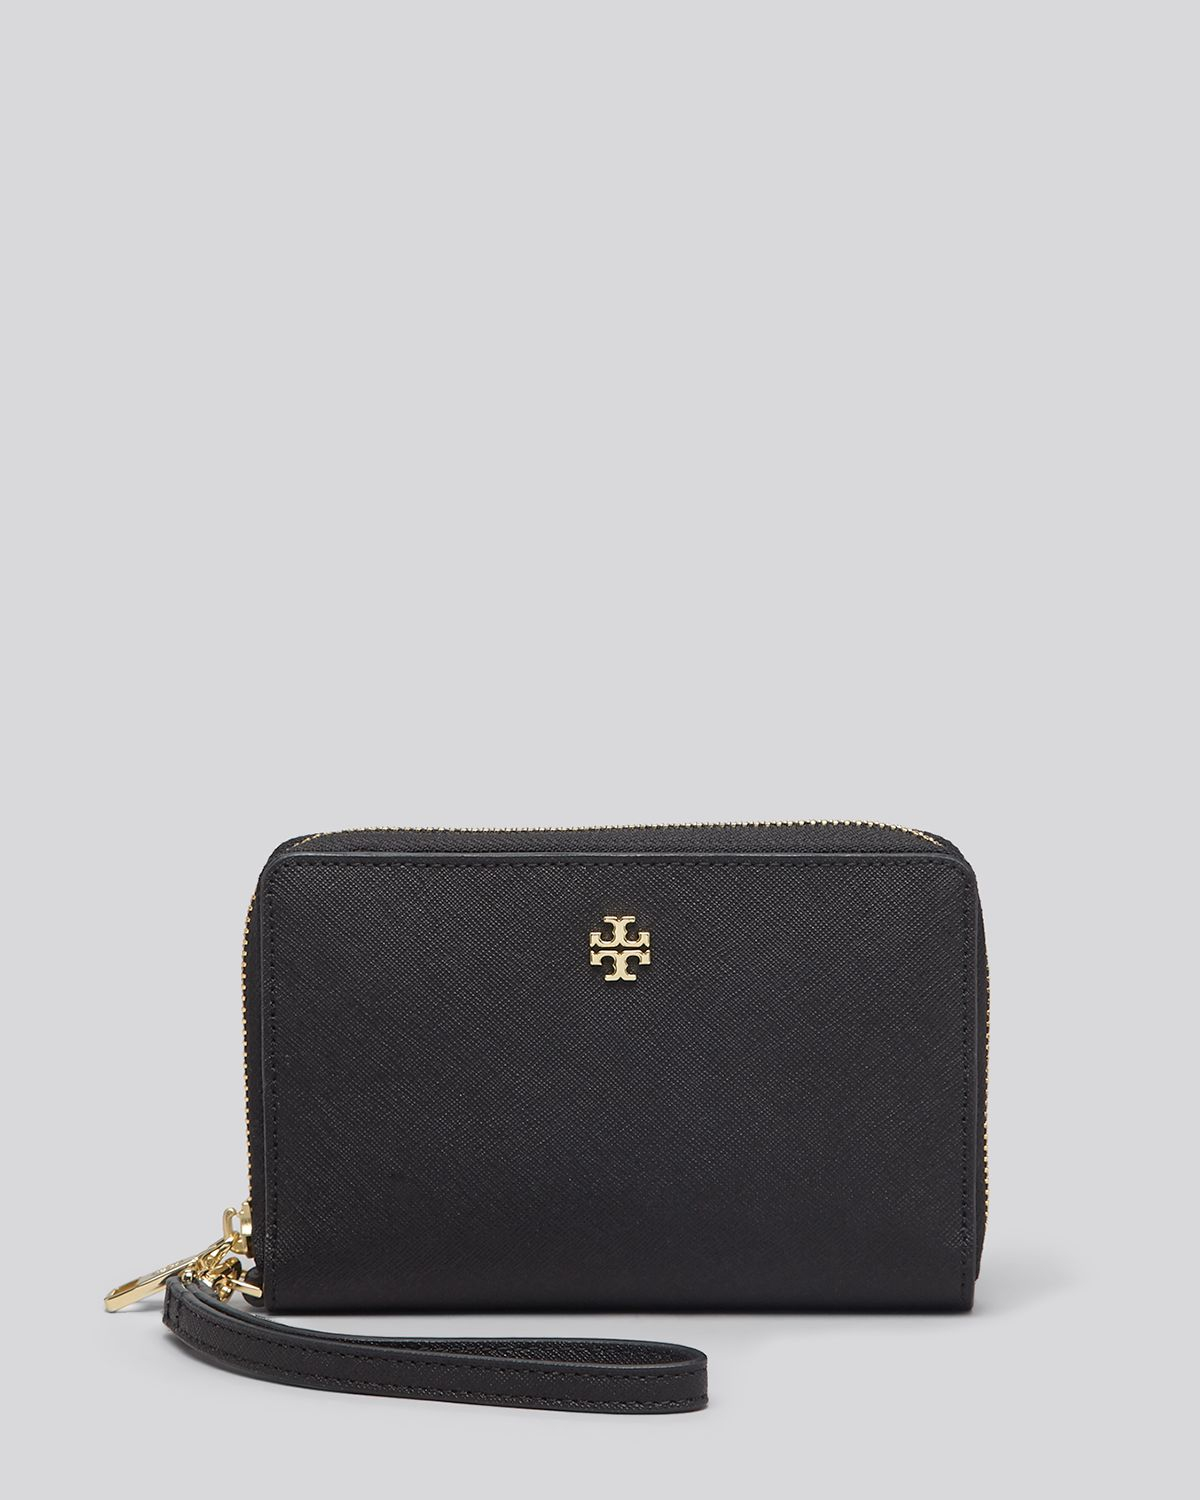 Tory Burch Iphone 5/5S Wristlet - York Large in Black | Lyst